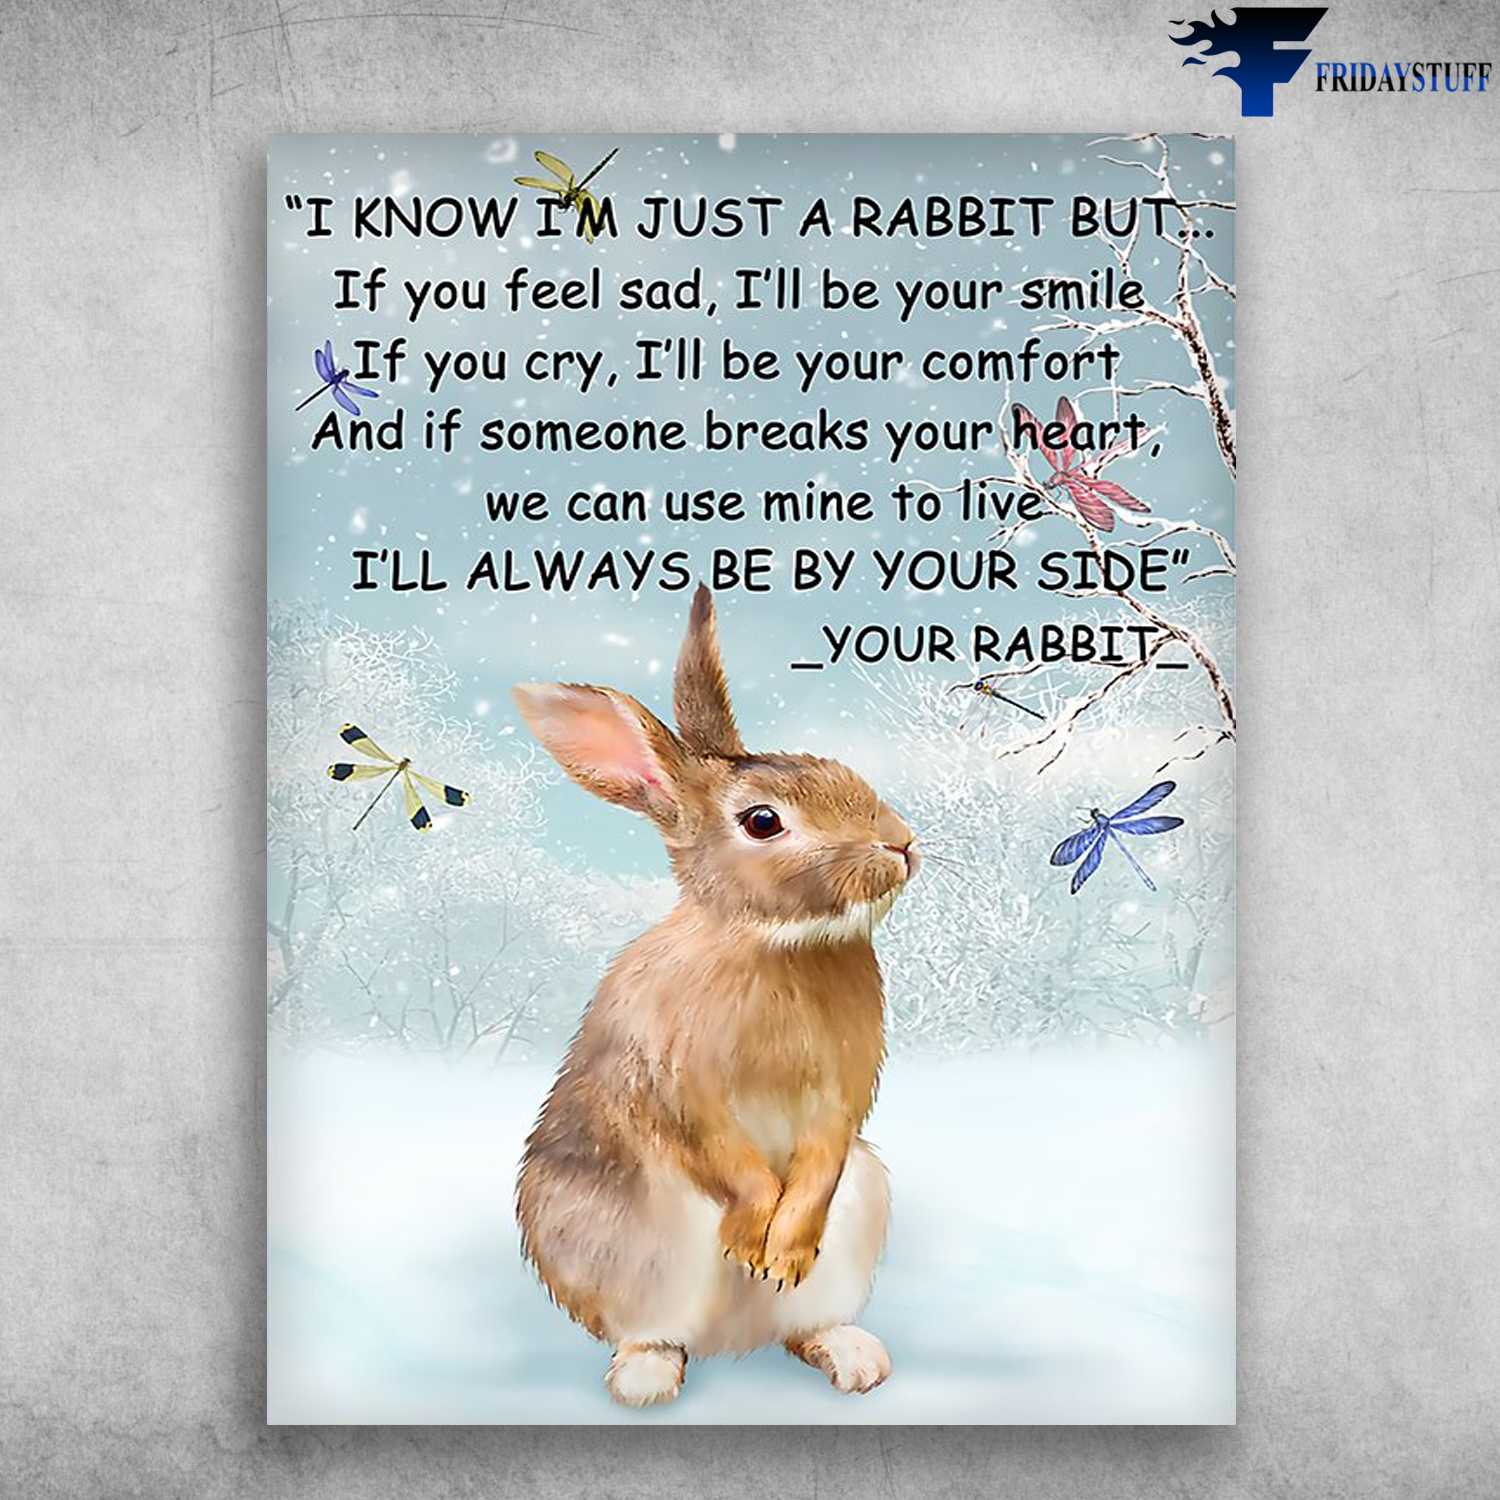 Rabbit Poster, Bunny Dragonfly - I Know I'm Just A Rabbit But, If You Feel Sad, I'll Be Your Smile, If You Cry, I'll Be Your Comfort